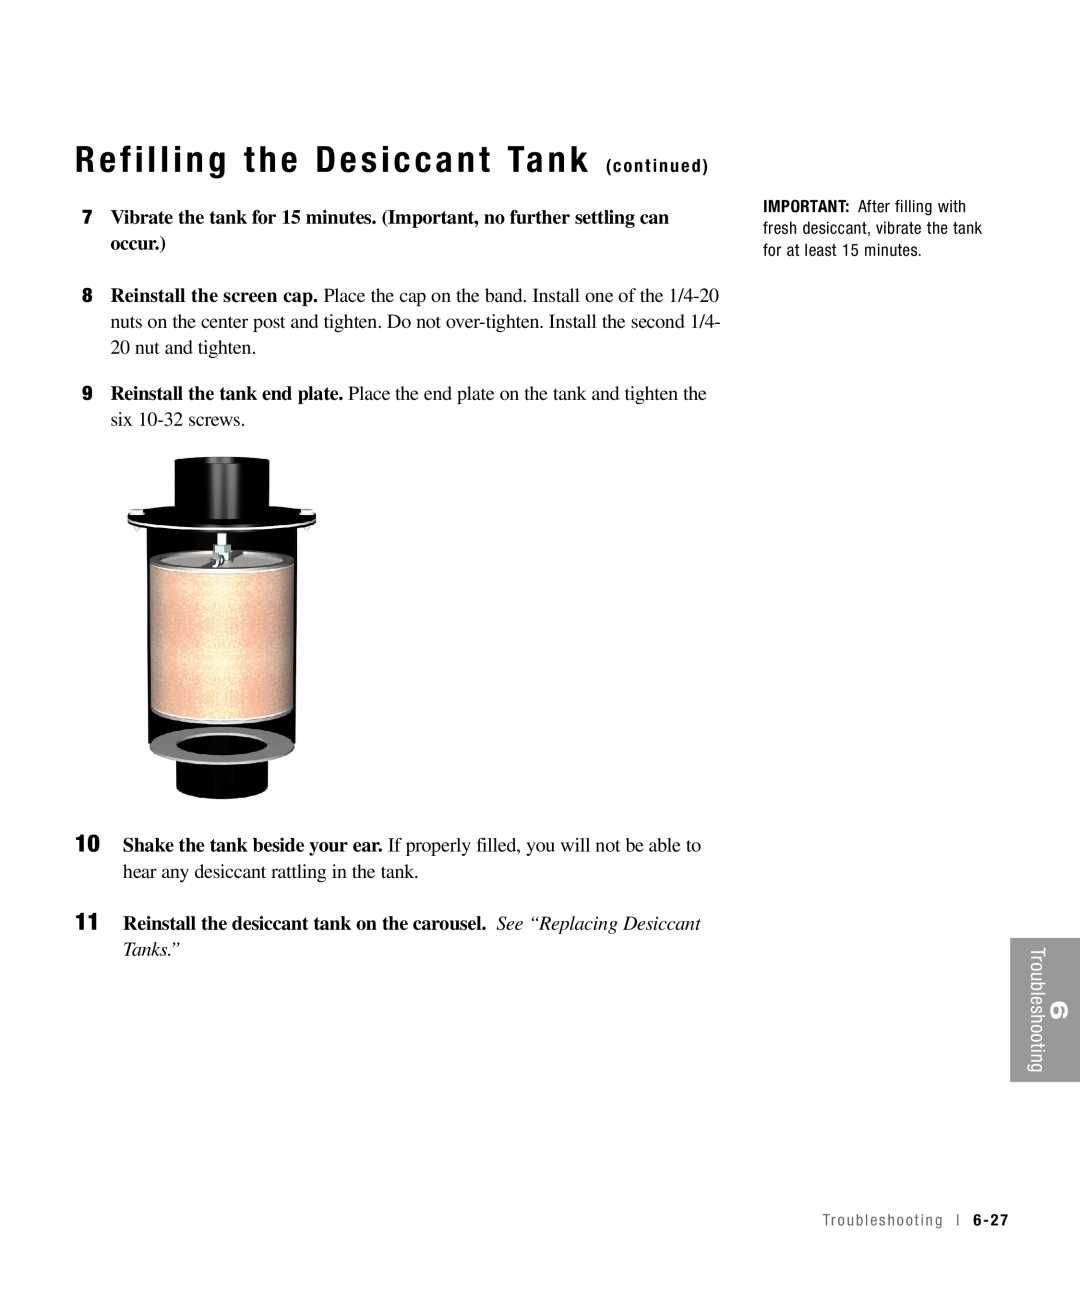 Conair 15, 25, 50, 100 specifications Refilling the Desiccant Tank c o n t i n u e d, Troubleshooting 